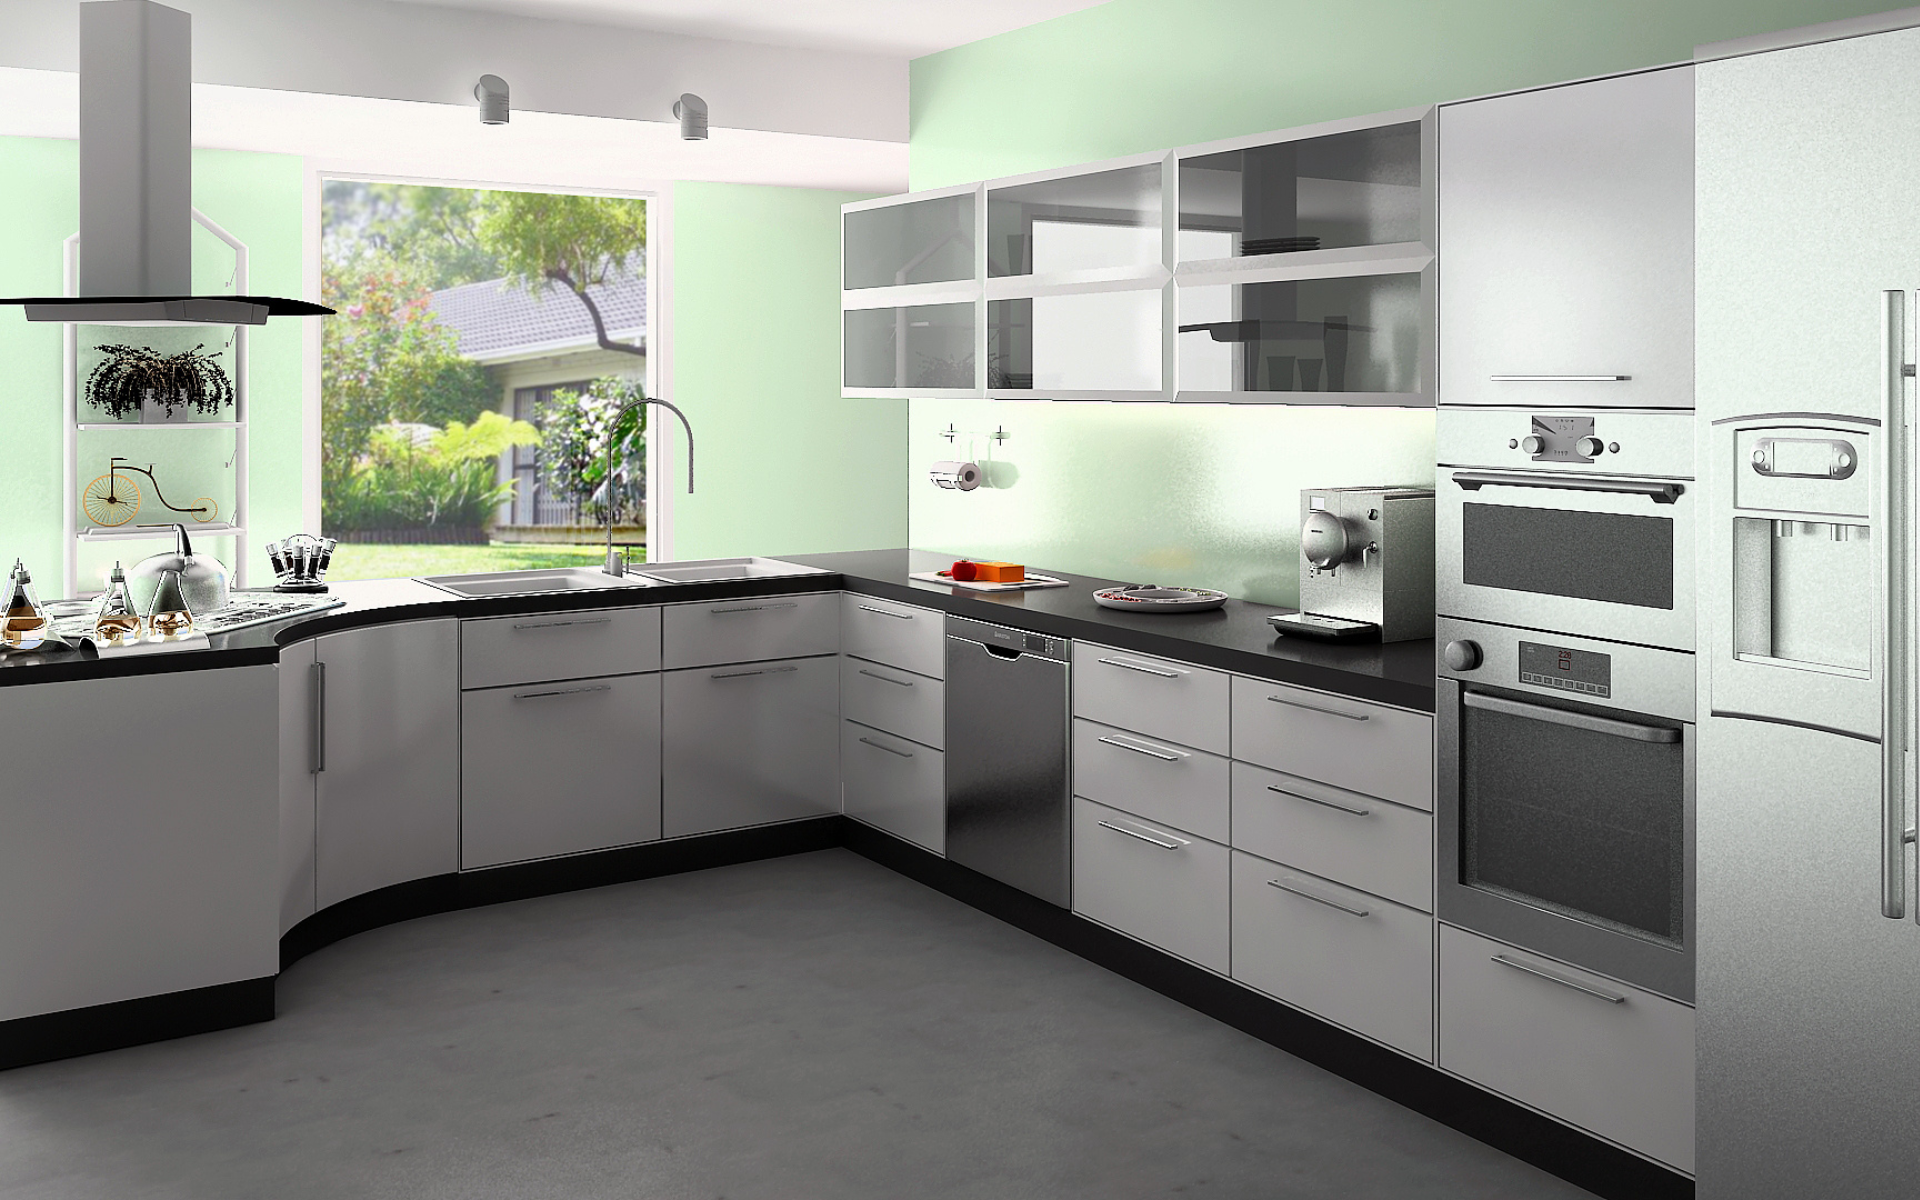 L-type kitchen with white cabinets and black countertops